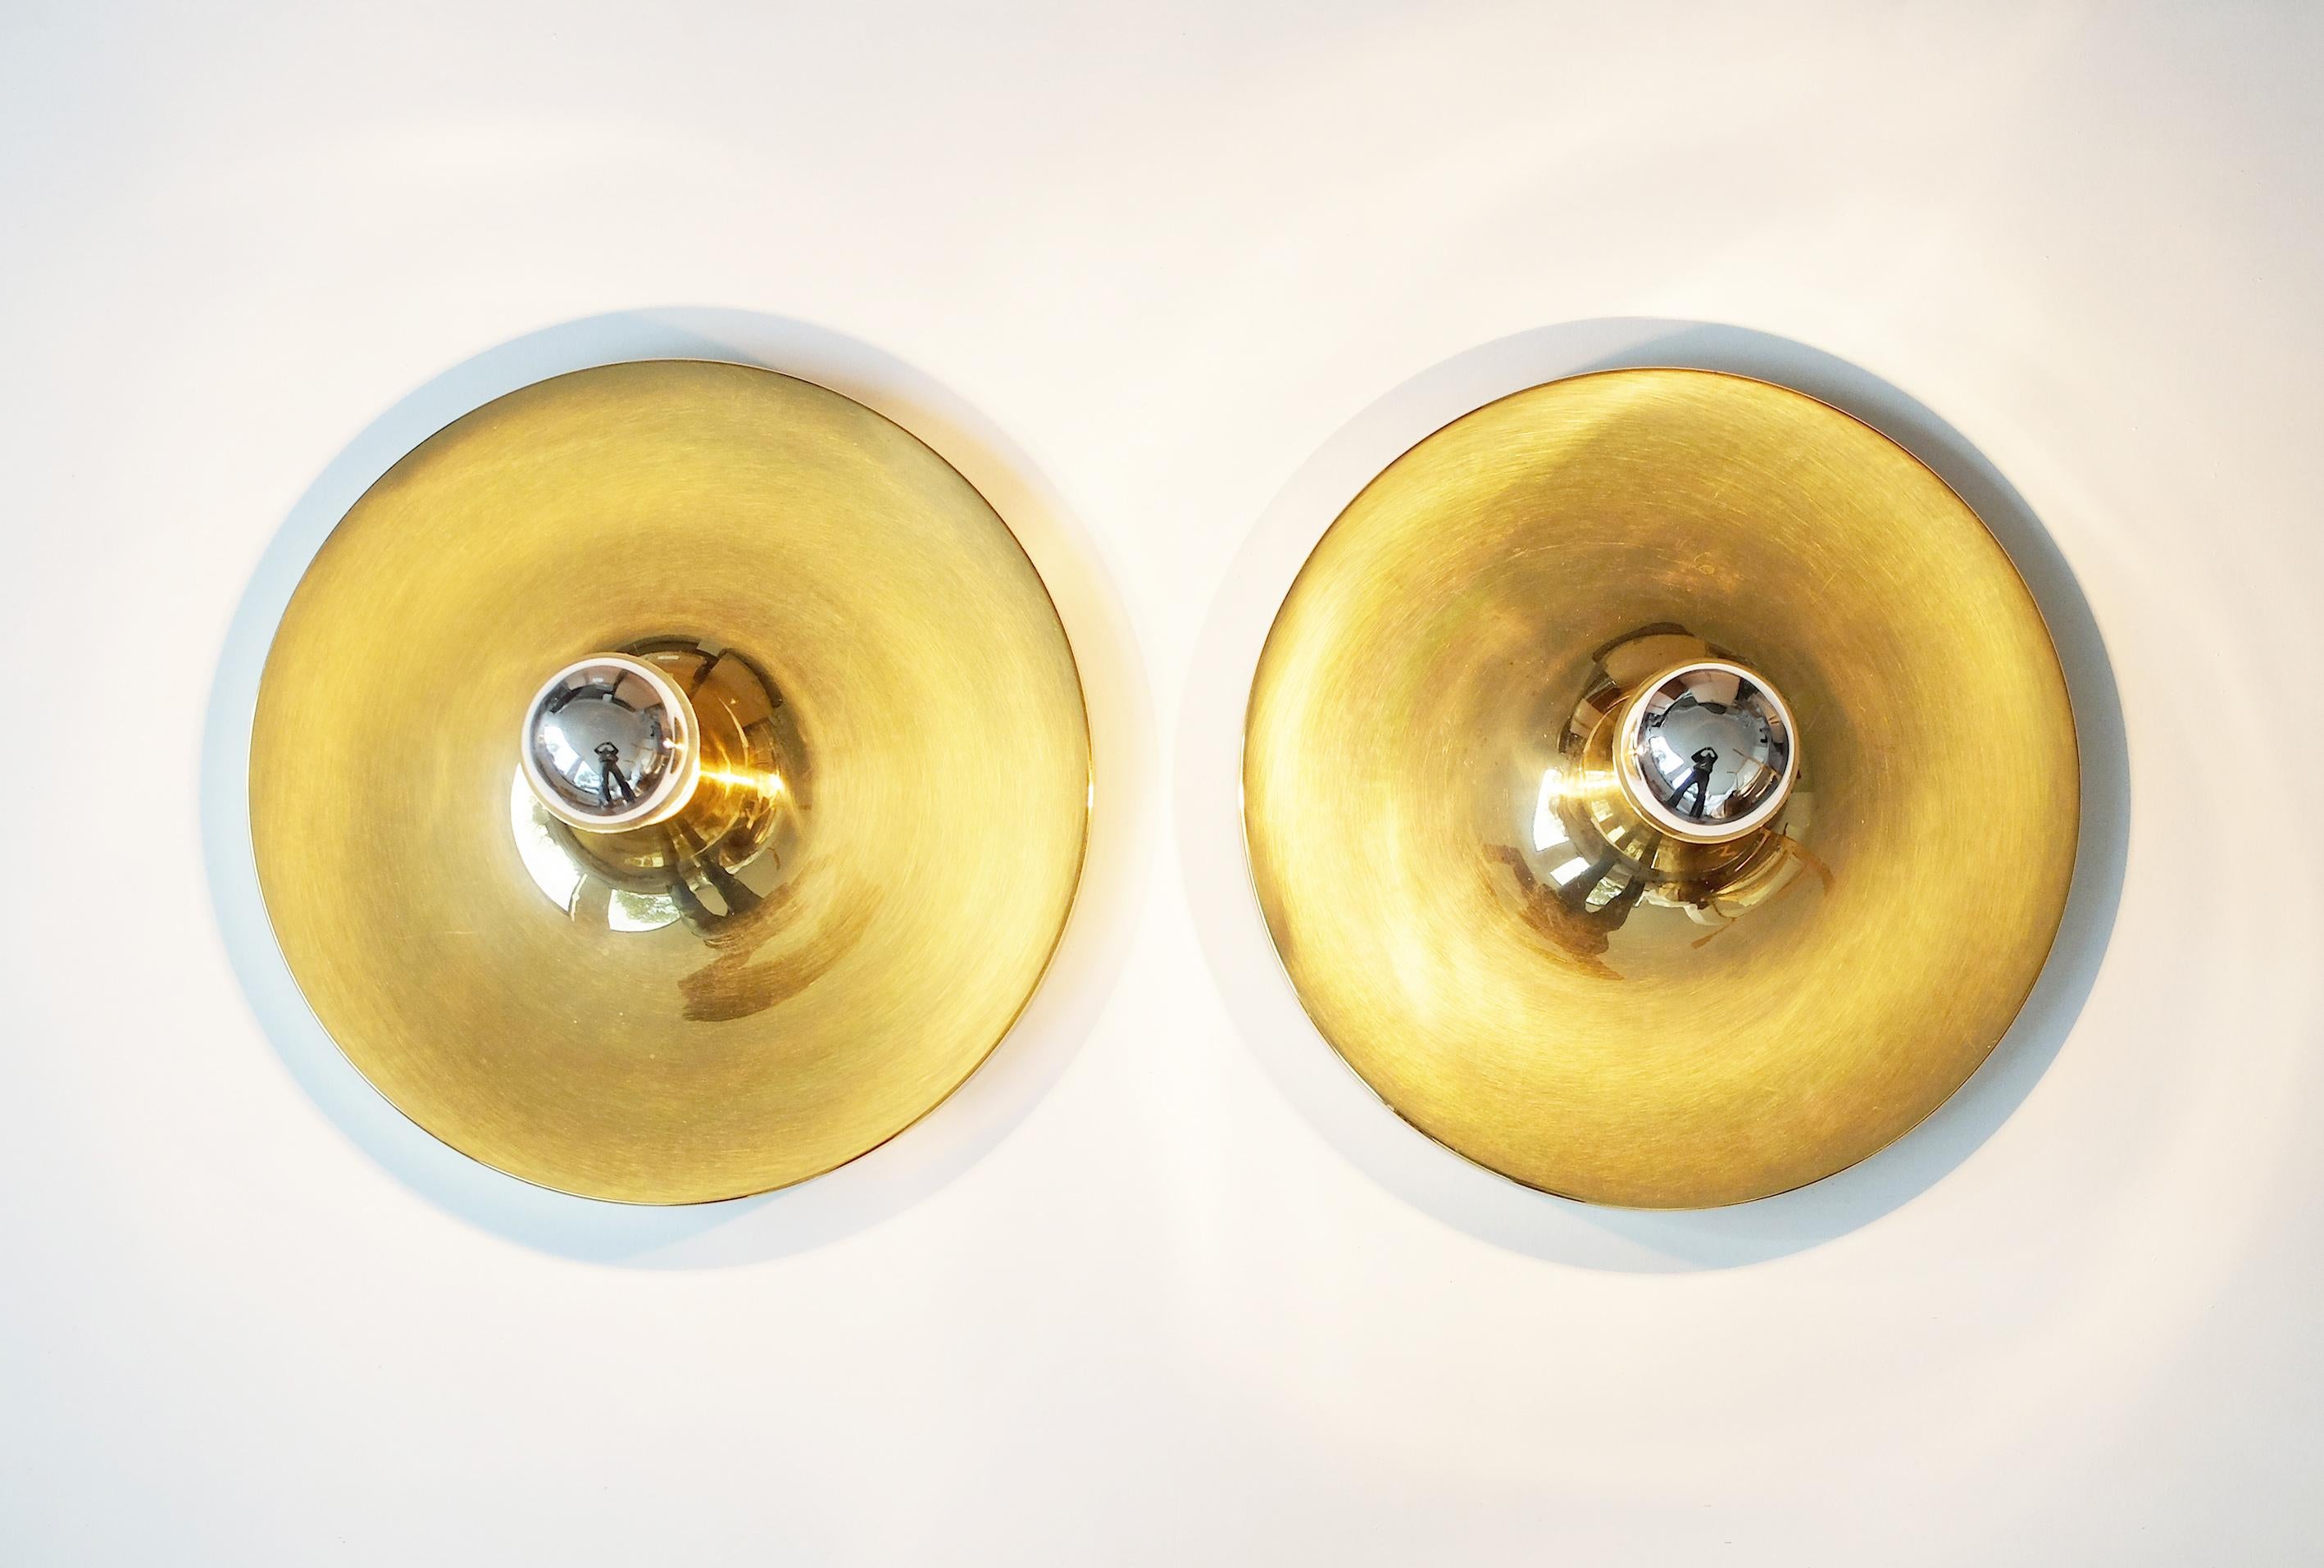 Pair of Space Age Flush lights from the 1960s, manufactured by Sölken Leuchten in Germany. 

This kind of lights were commissioned / selected by Charlotte Perriand for the interior design of the flats of the 'Les Arcs' and Méribel Ski Resorts in the